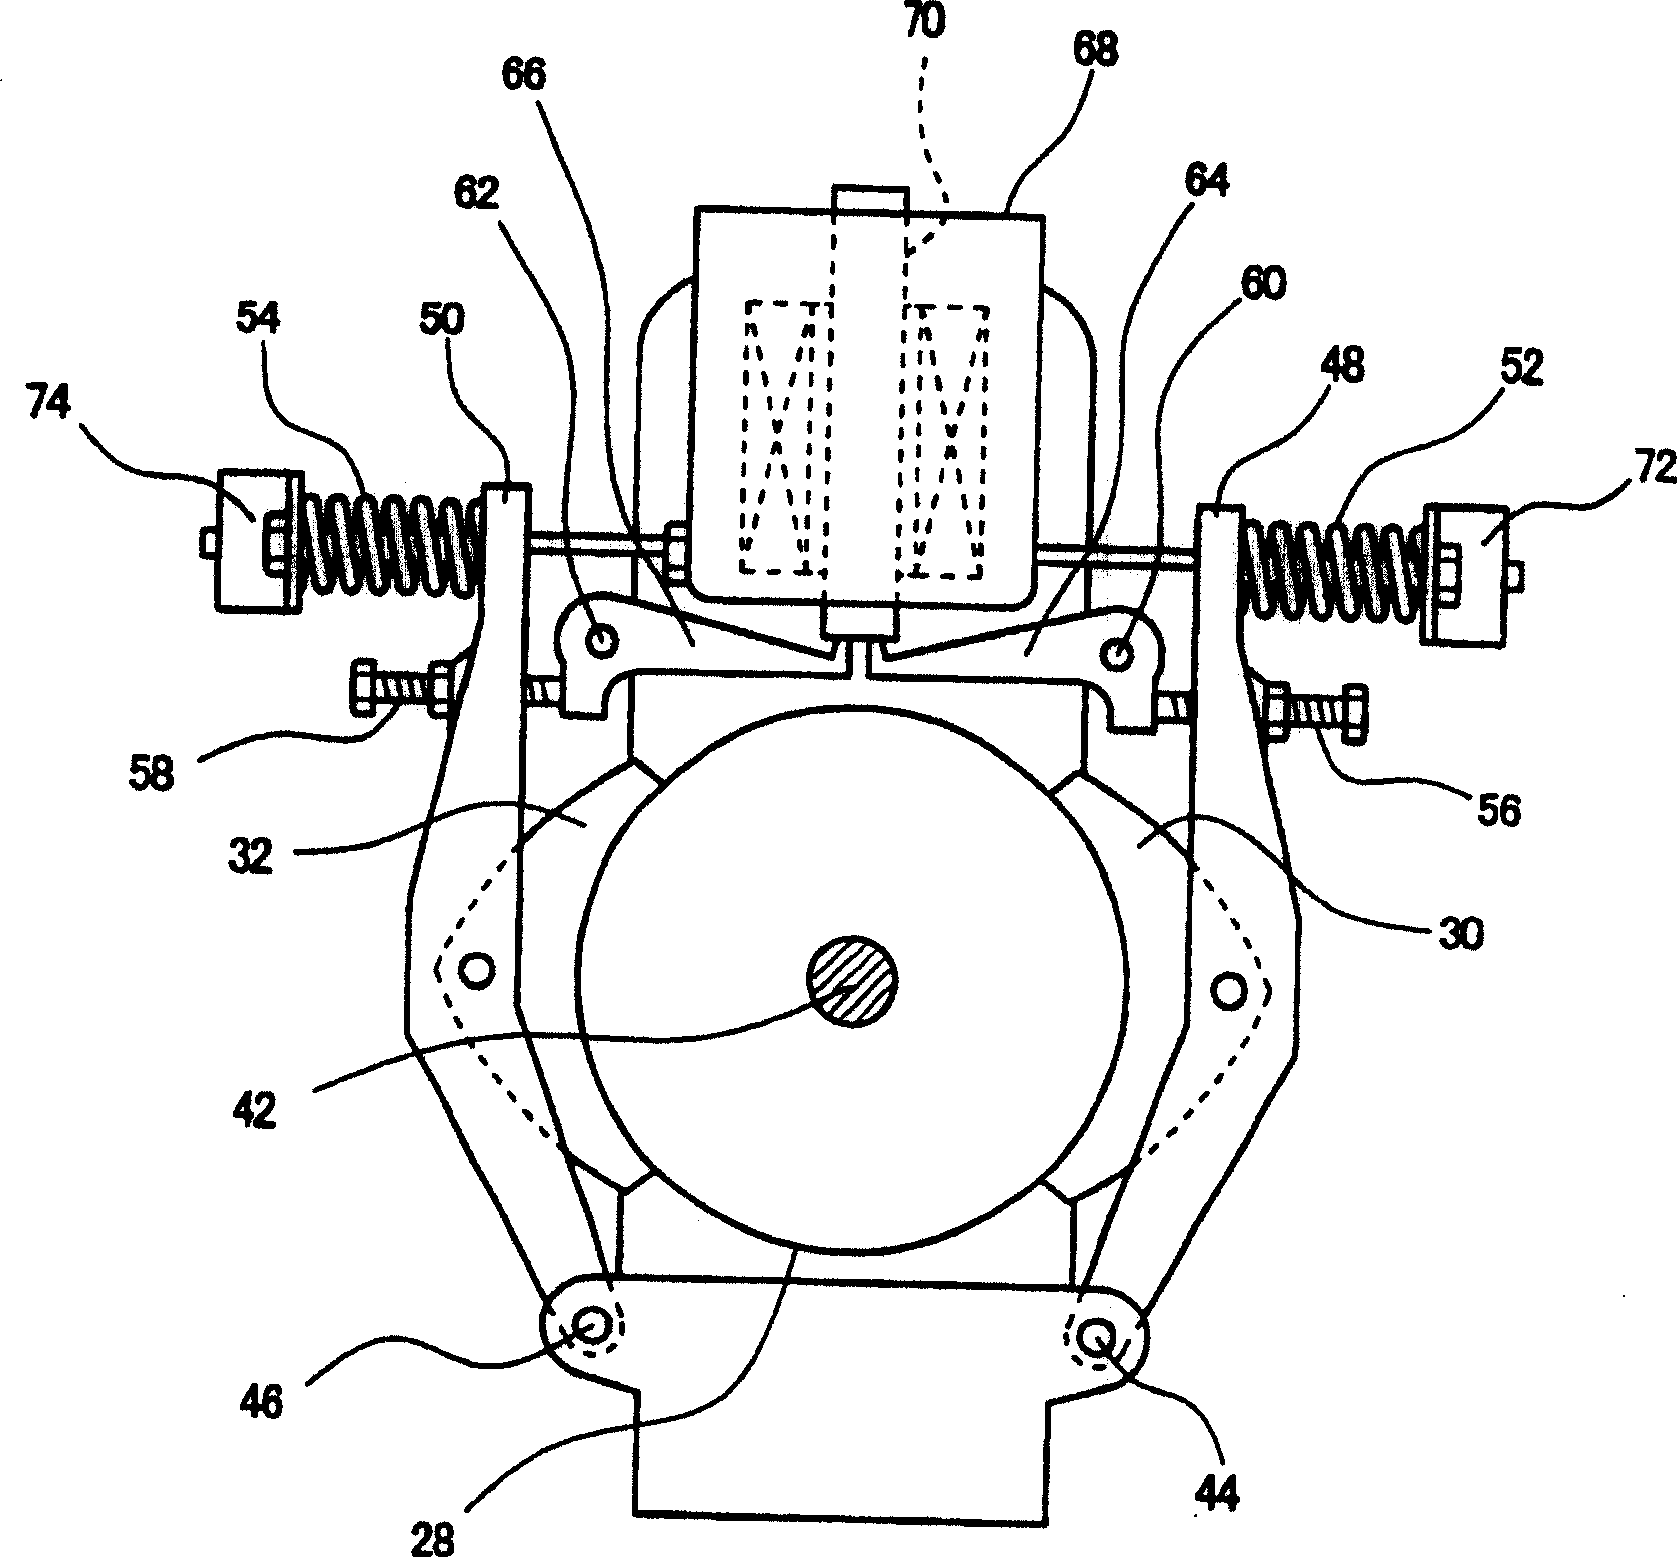 A device and a method for measuring torques of elevators